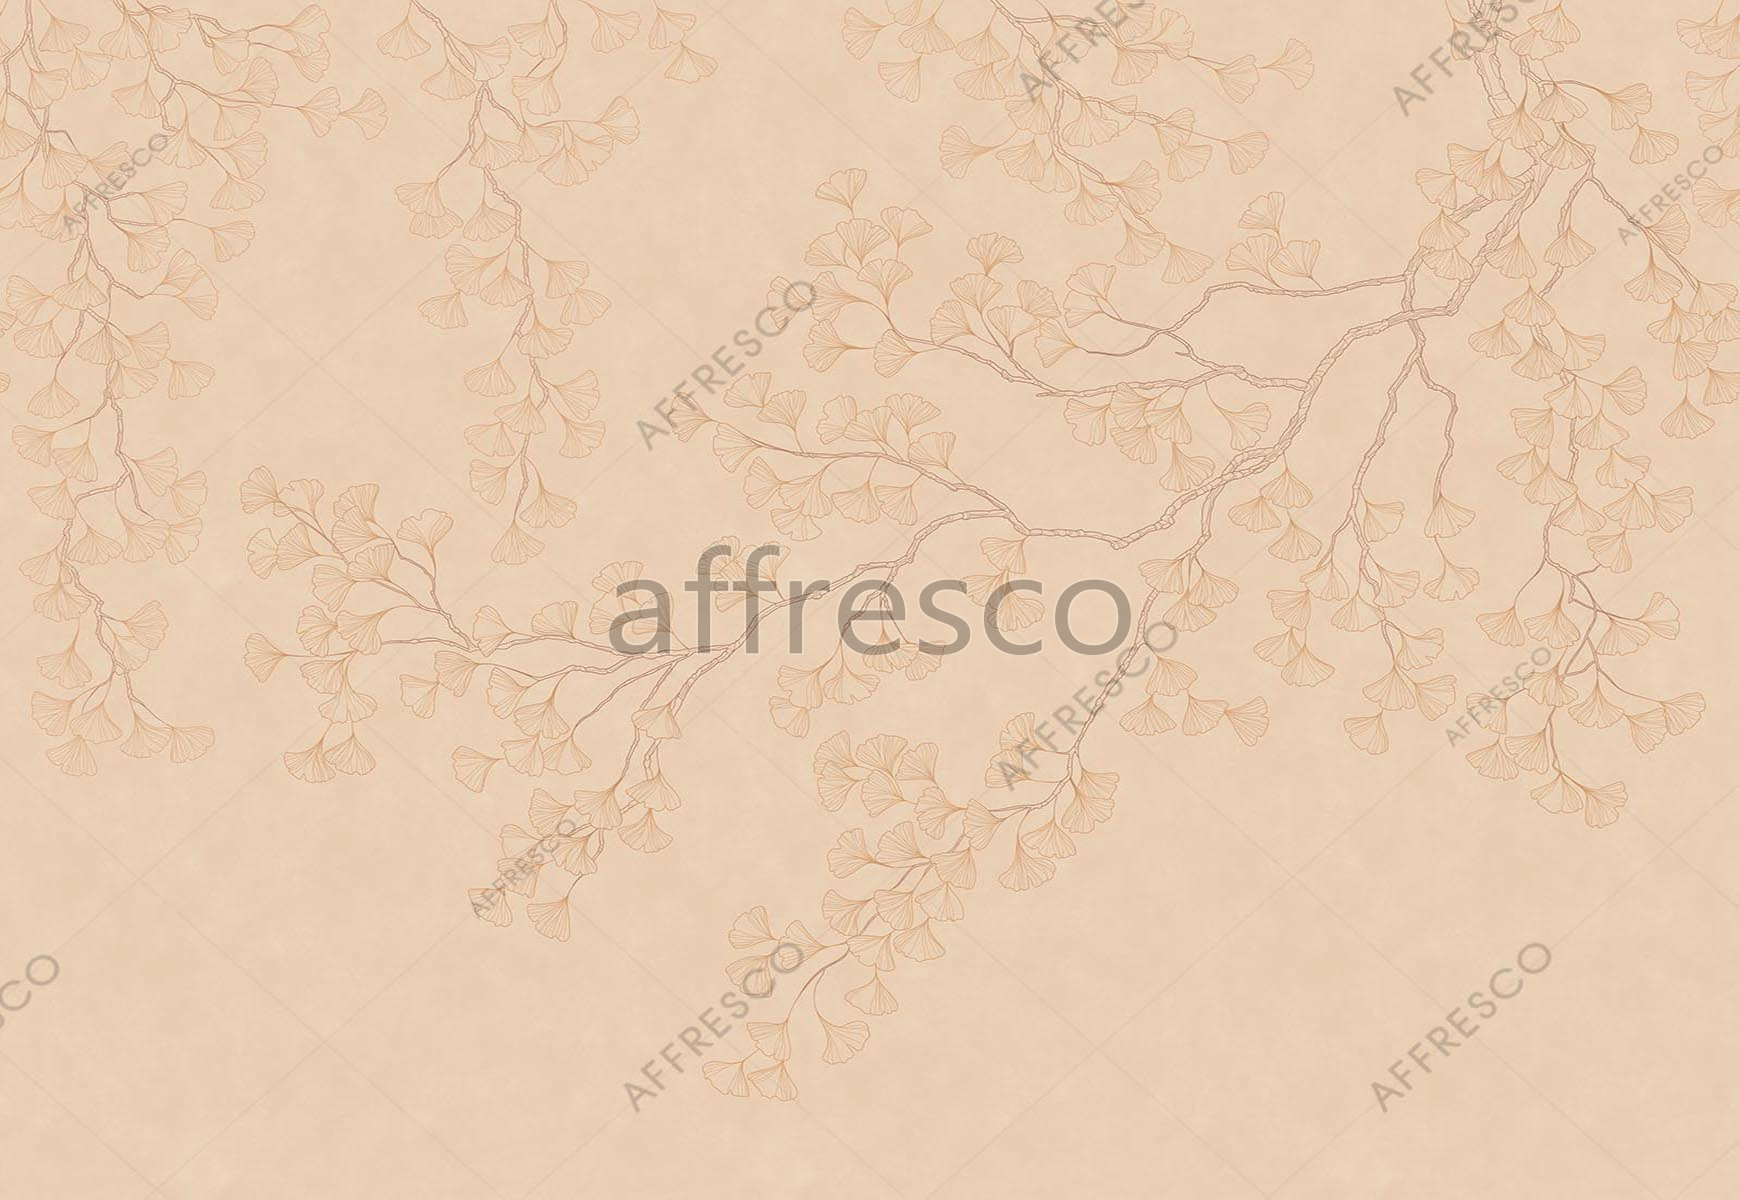 ID139150 | Forest | Oddity of the East | Affresco Factory